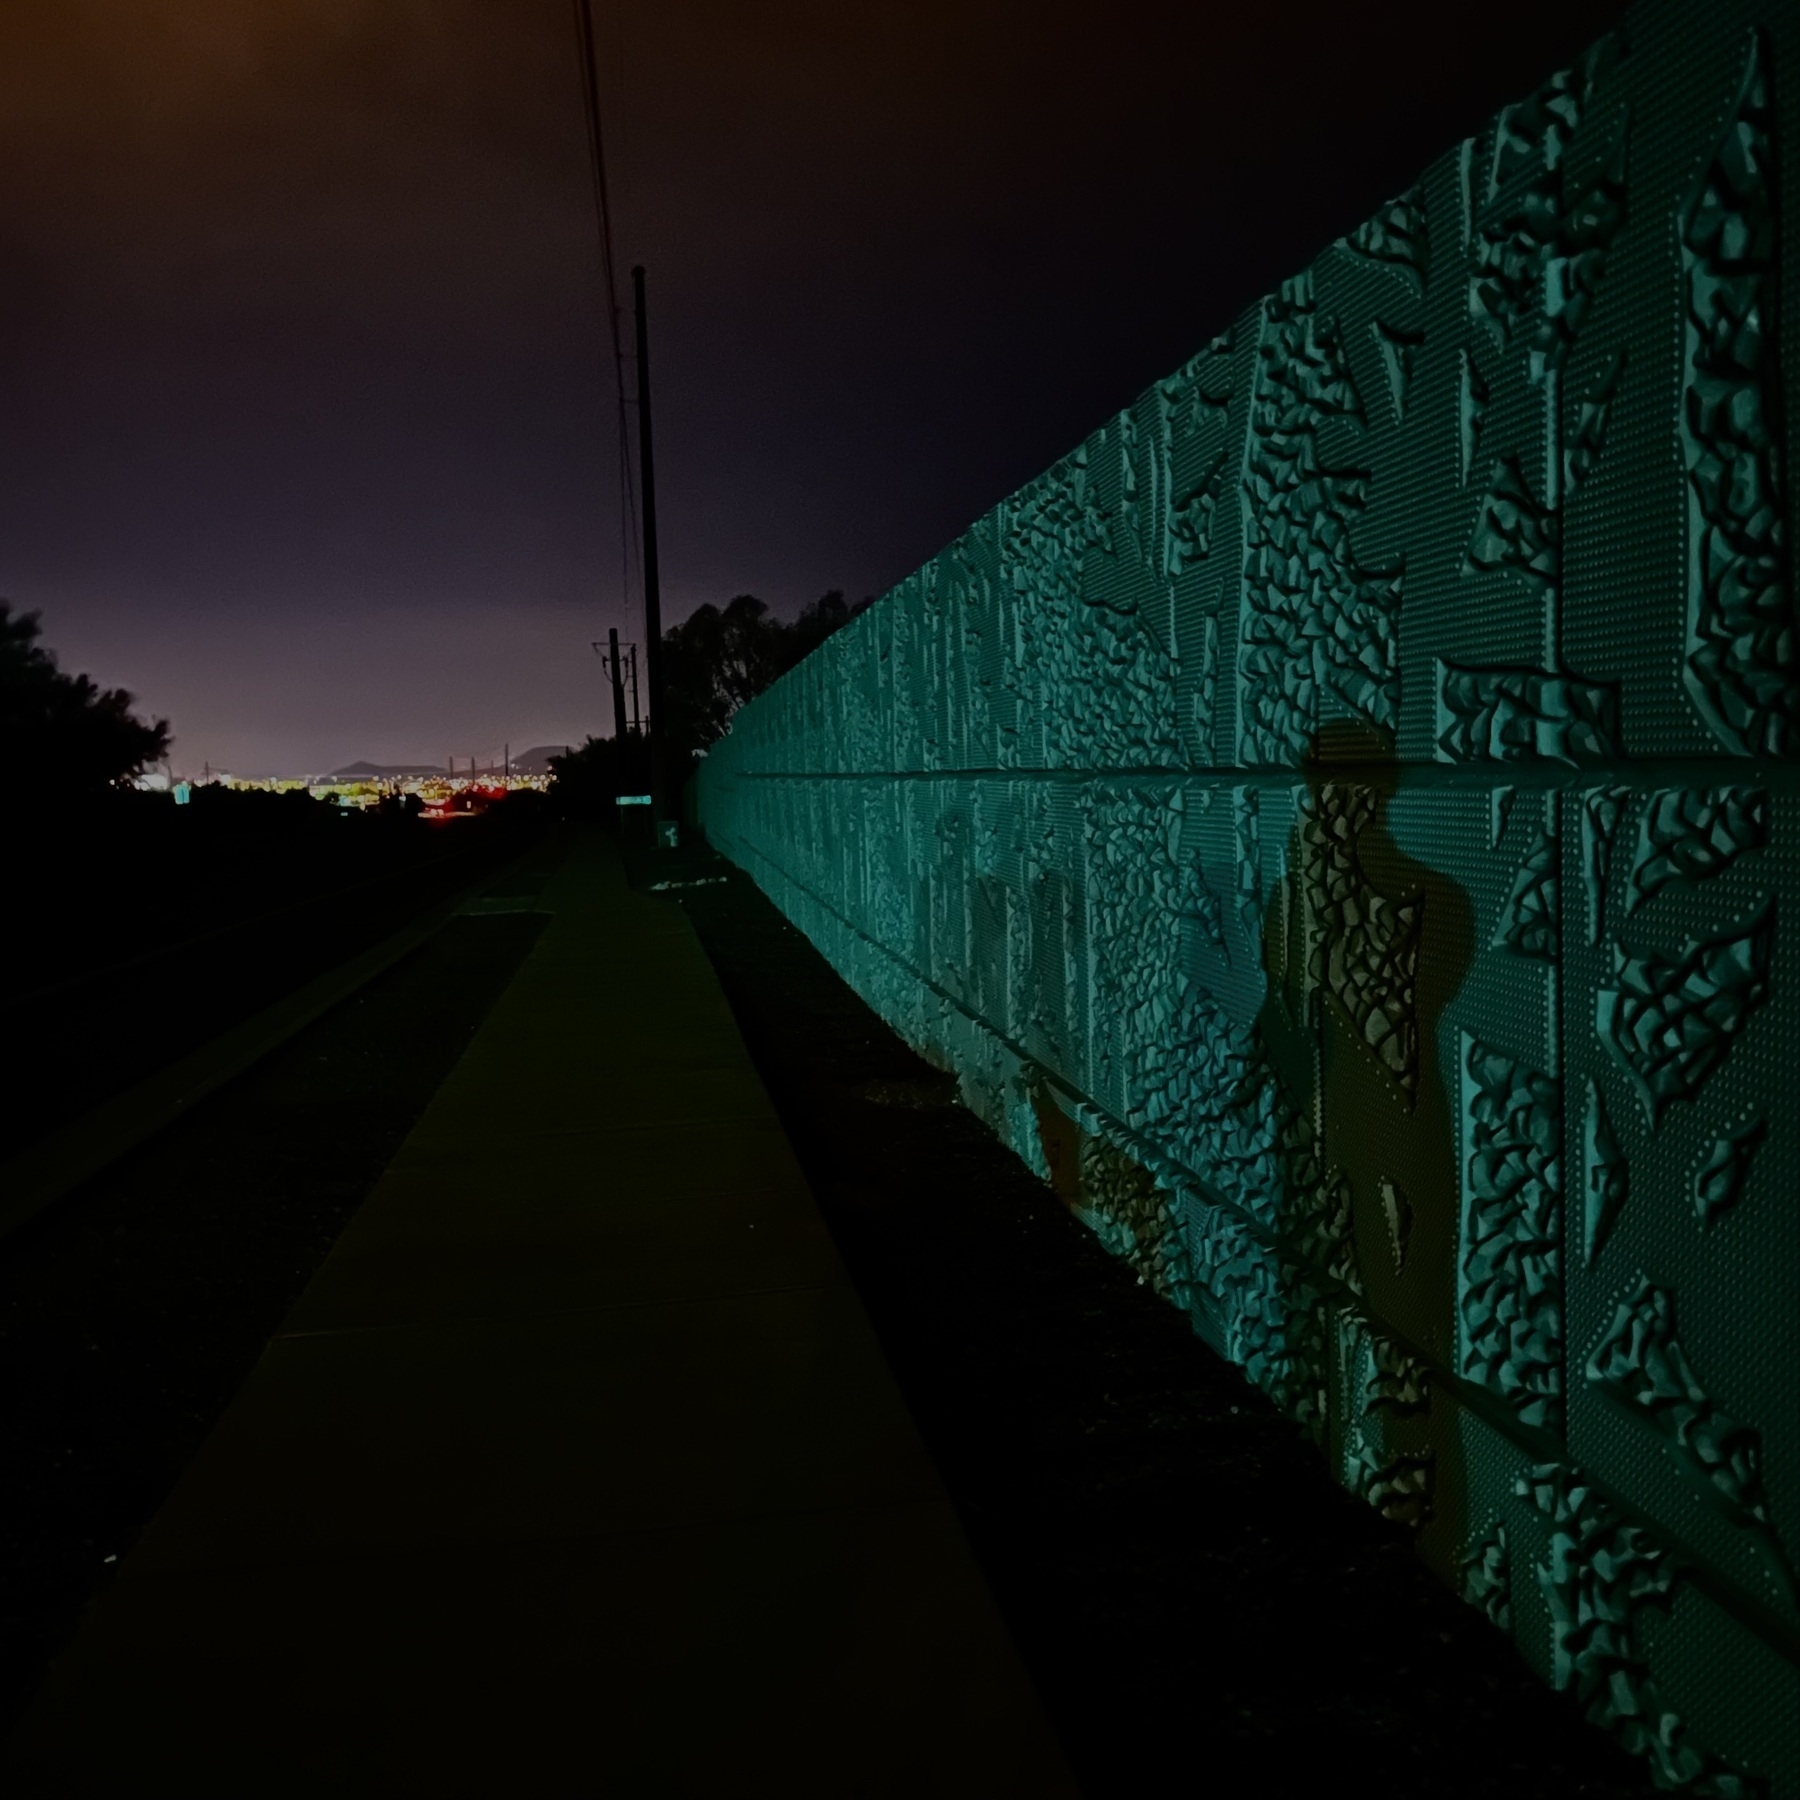 A wall bathed in the green of a traffic light with the shadow of a man walking his dog